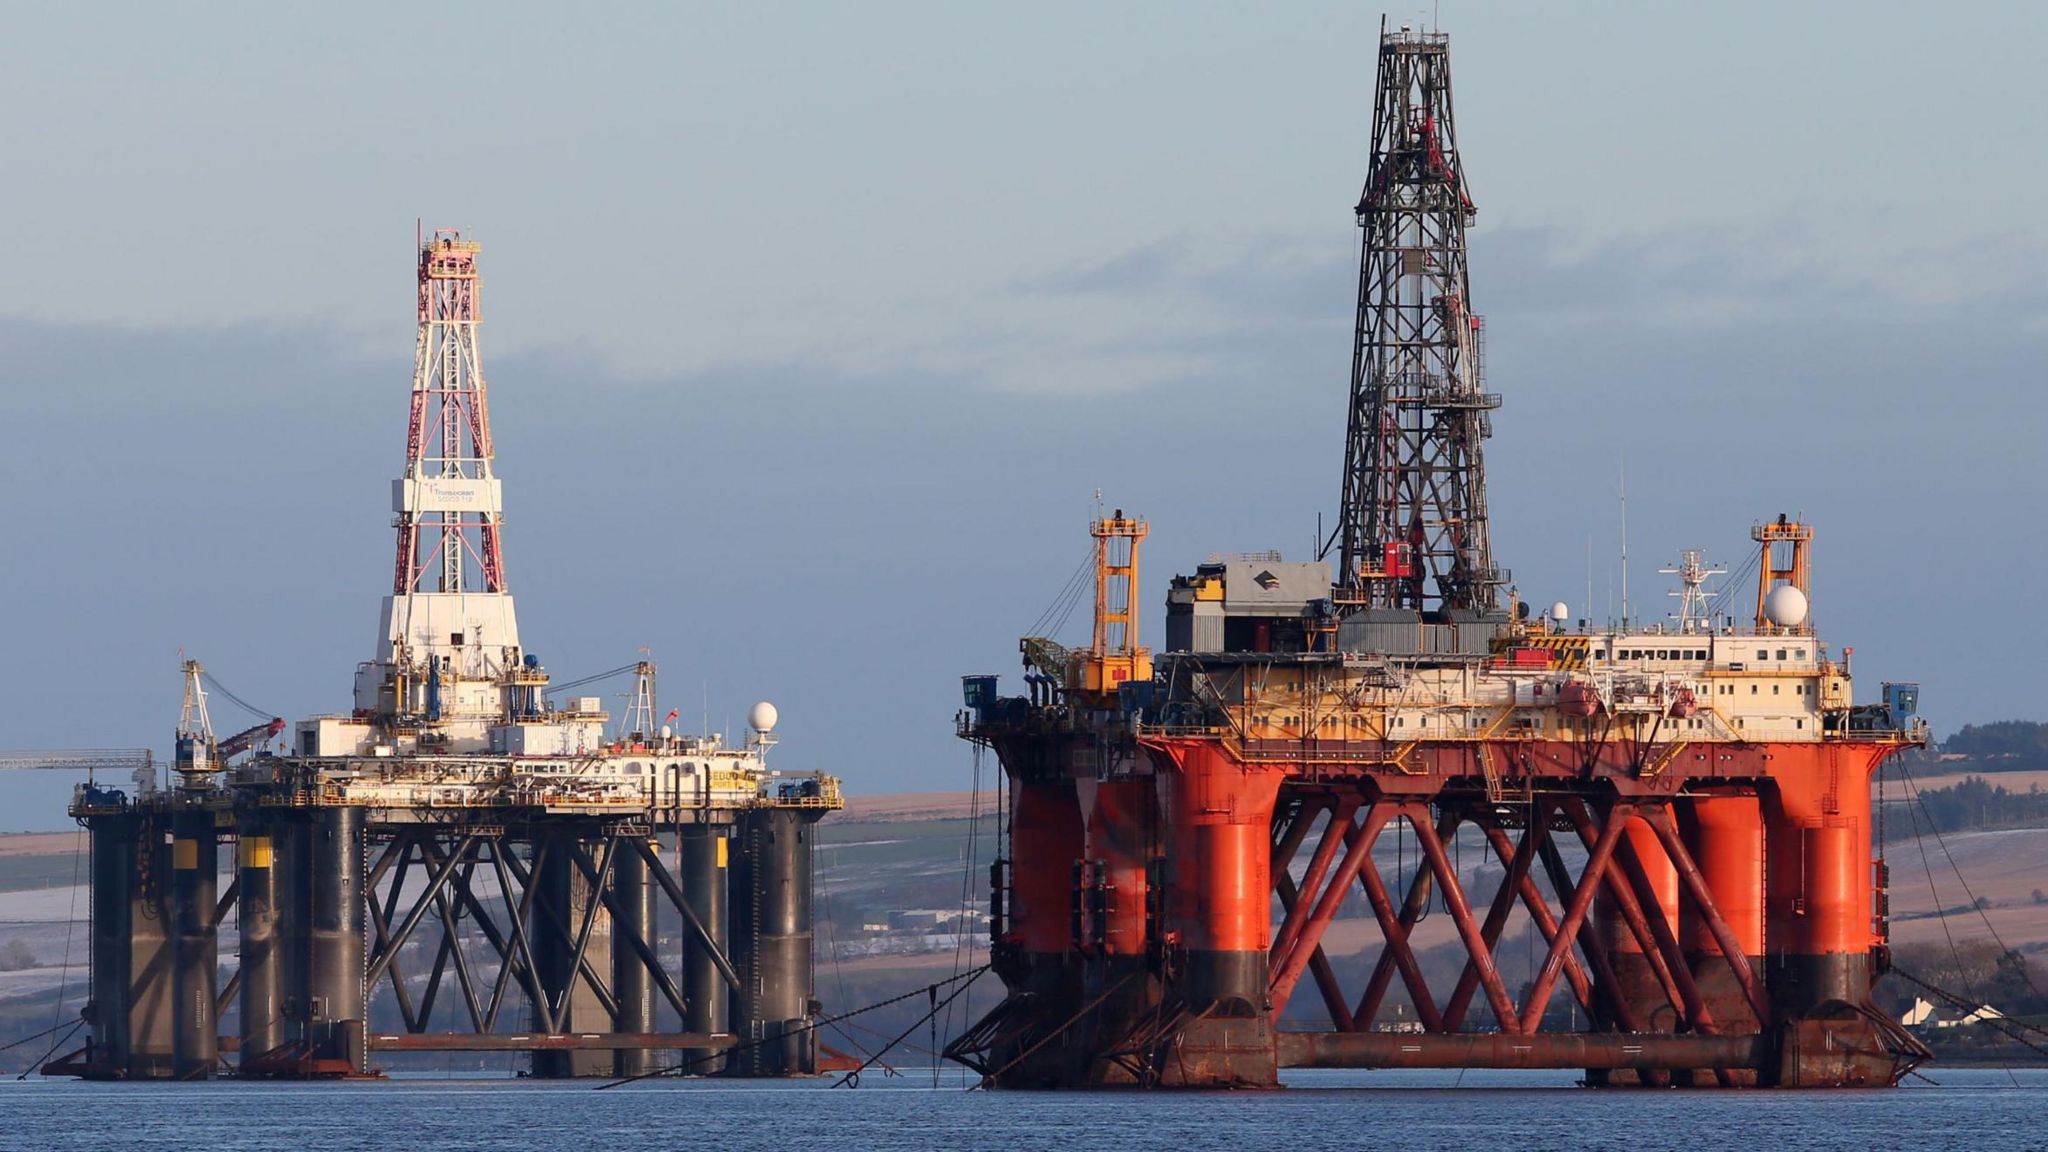 Oil platform standing amongst other rigs that have been left in the Cromarty Firth near Invergordon in the Highlands of Scotland